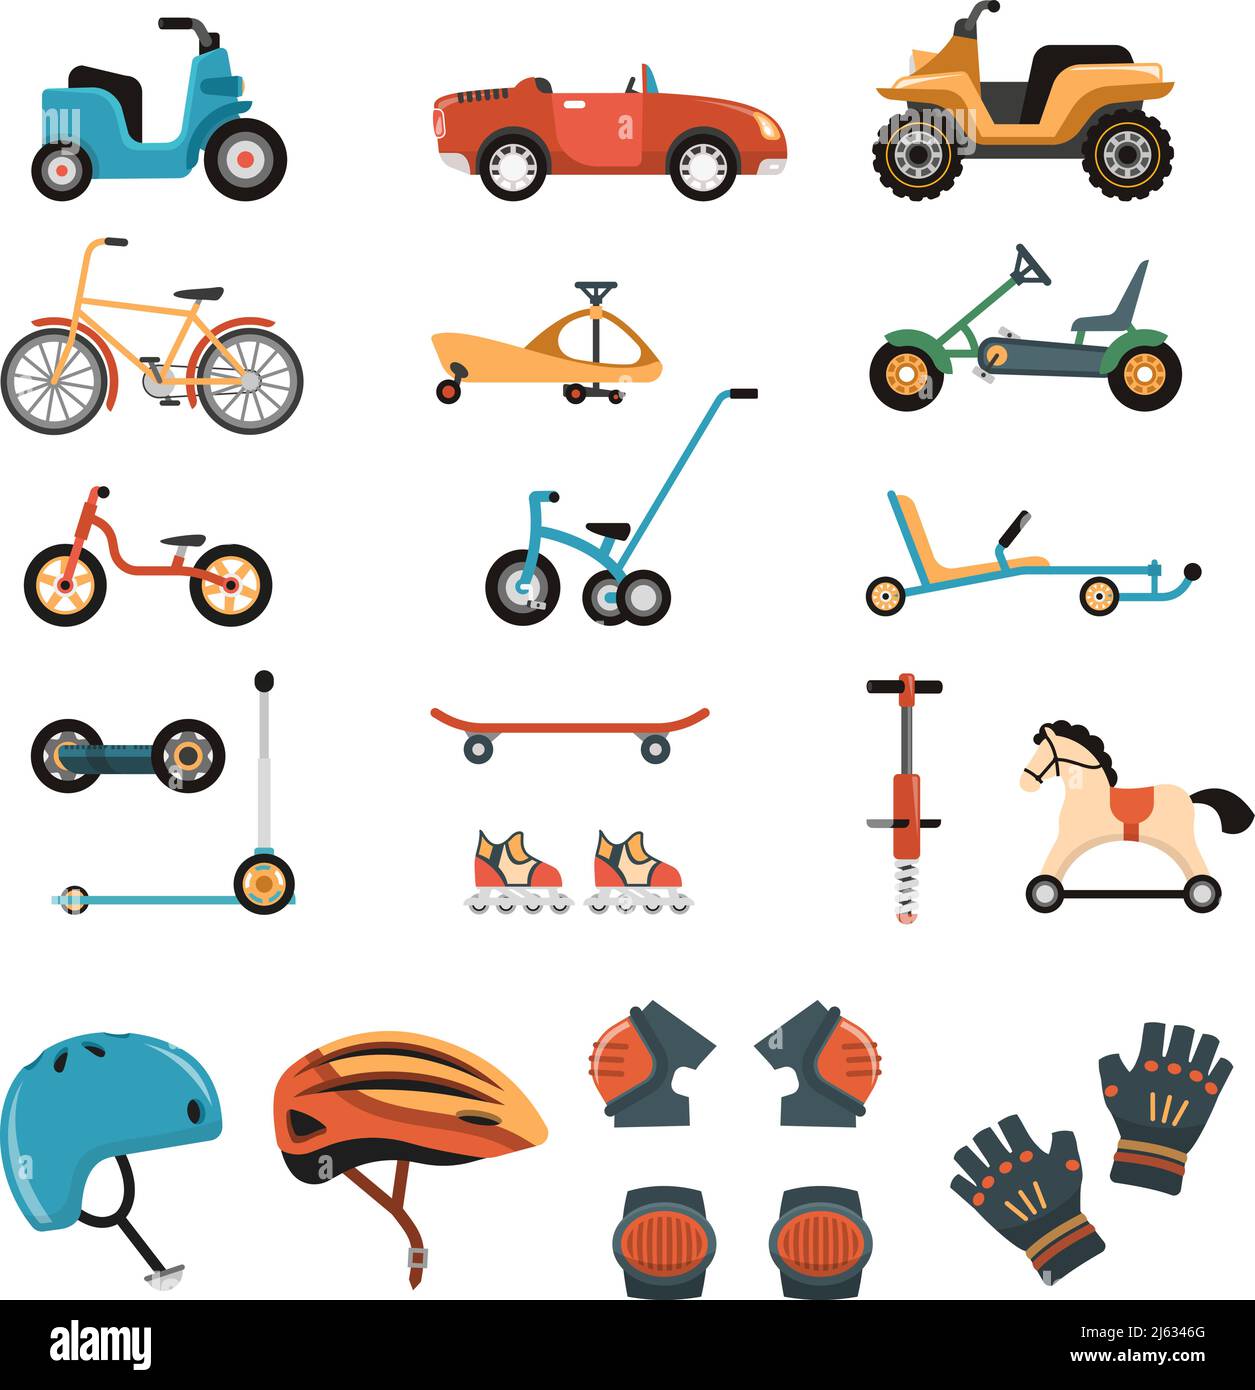 Child safety body protection sport equipment protective isolated images set with playcars bicycles kneecaps and helmets vector illustration Stock Vector